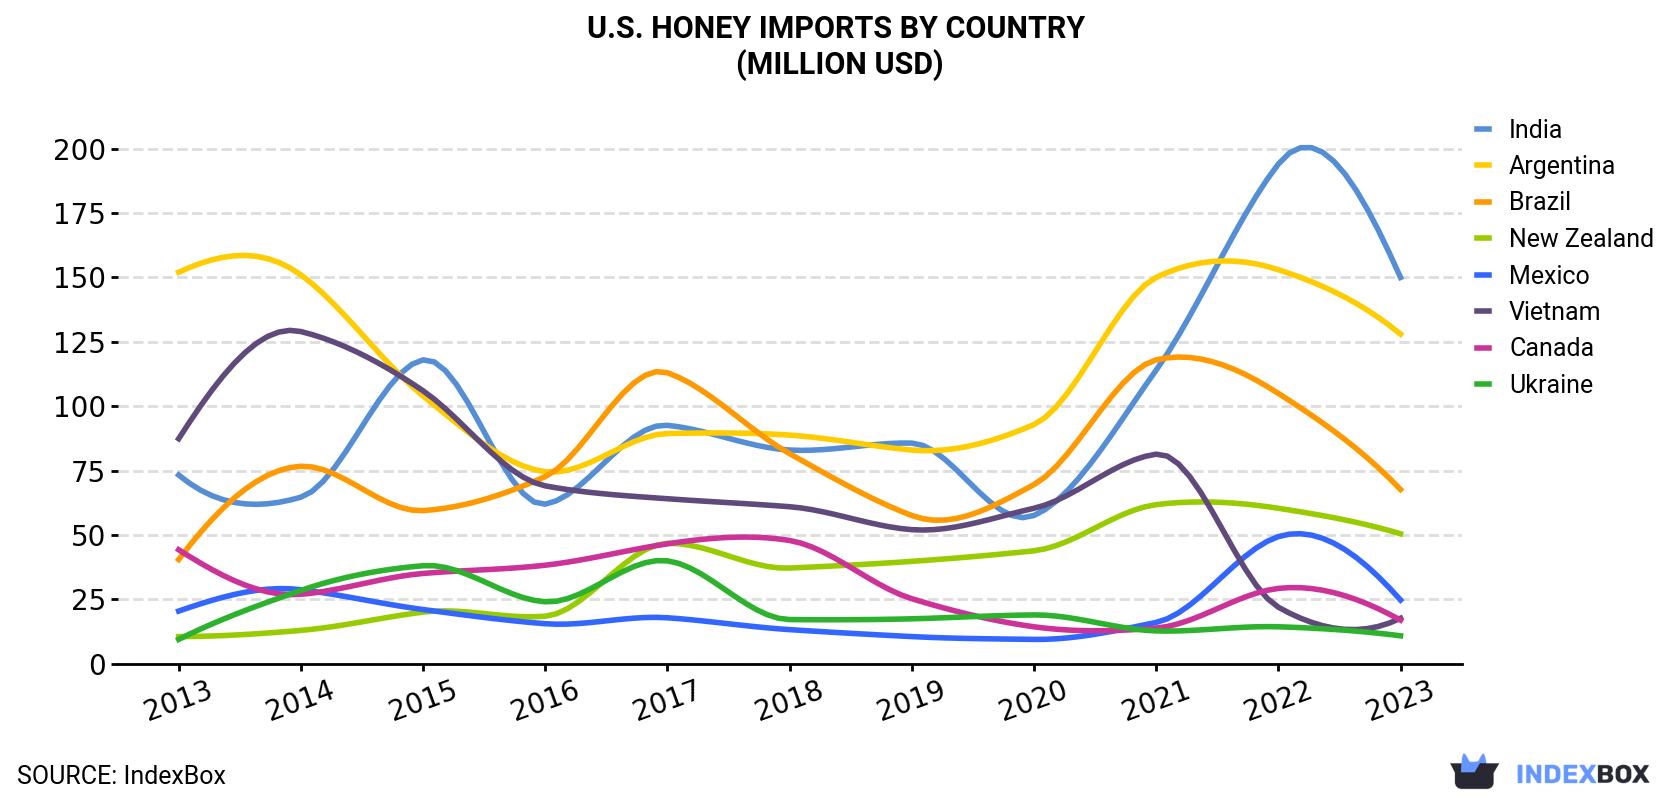 U.S. Honey Imports By Country (Million USD)